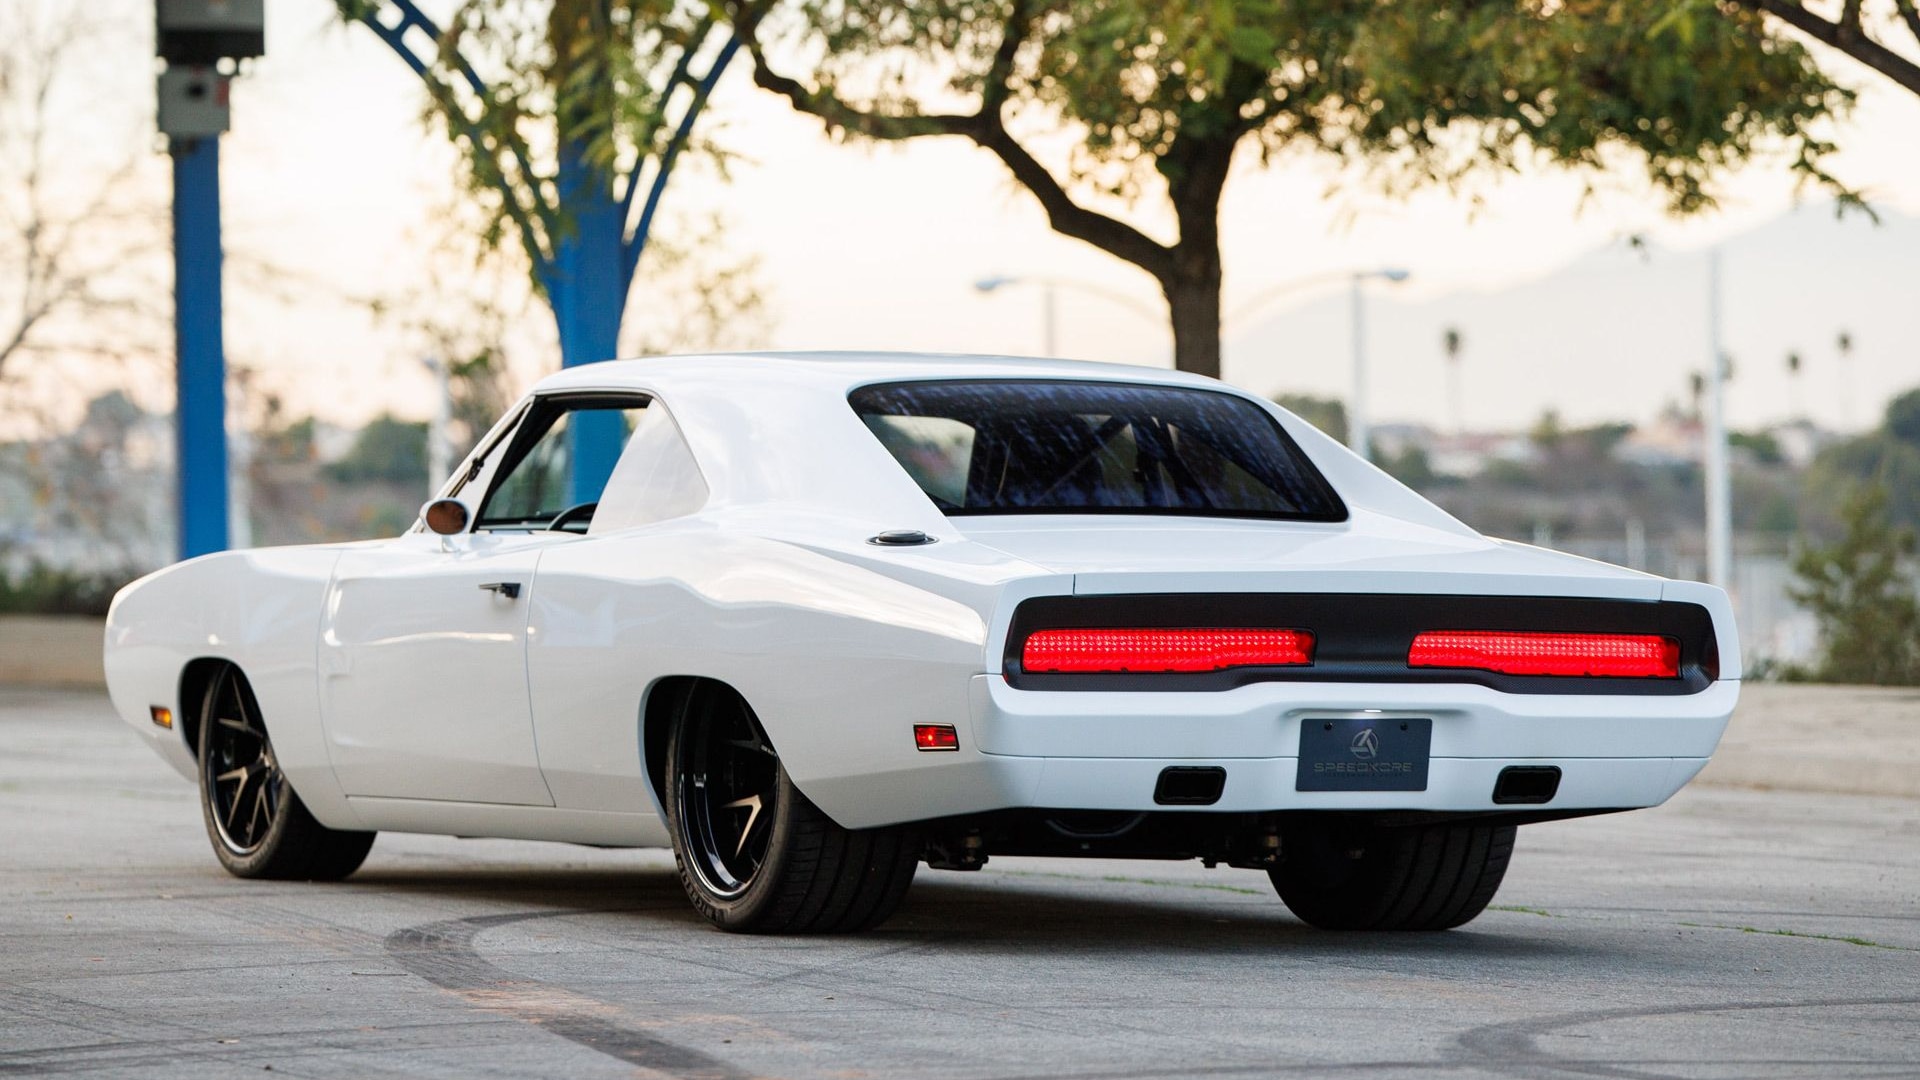 SpeedKore Ghost 1970 Dodge Charger